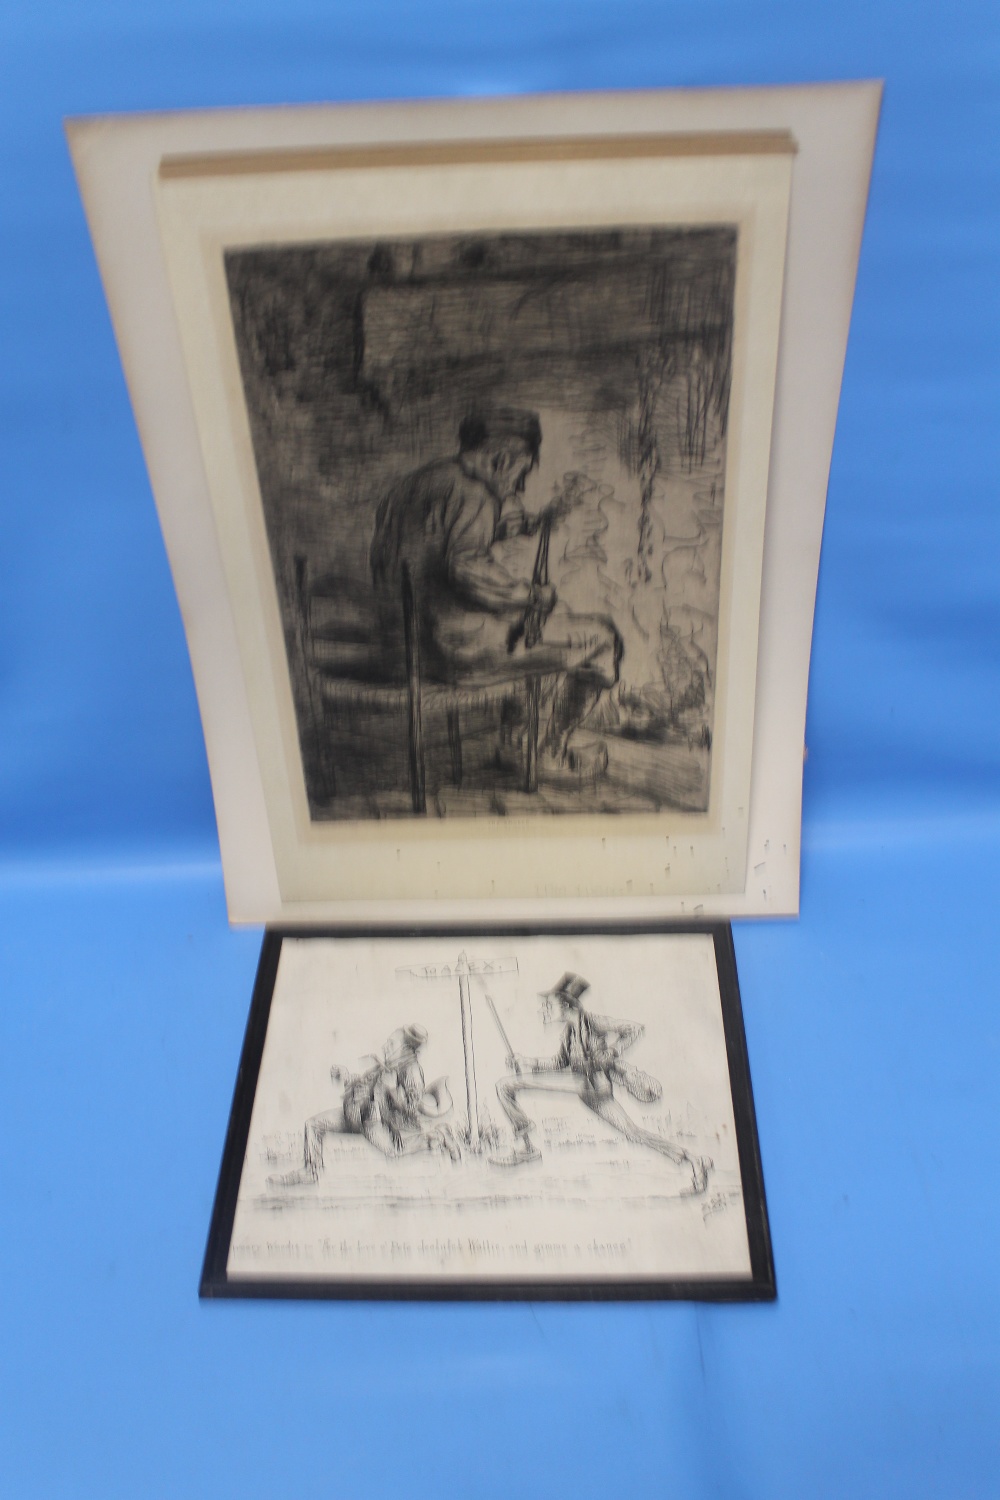 A FRAMED ETCHING TITLED "THE SMOKER", together with a mounted Comical Pen and Ink drawing "Weary